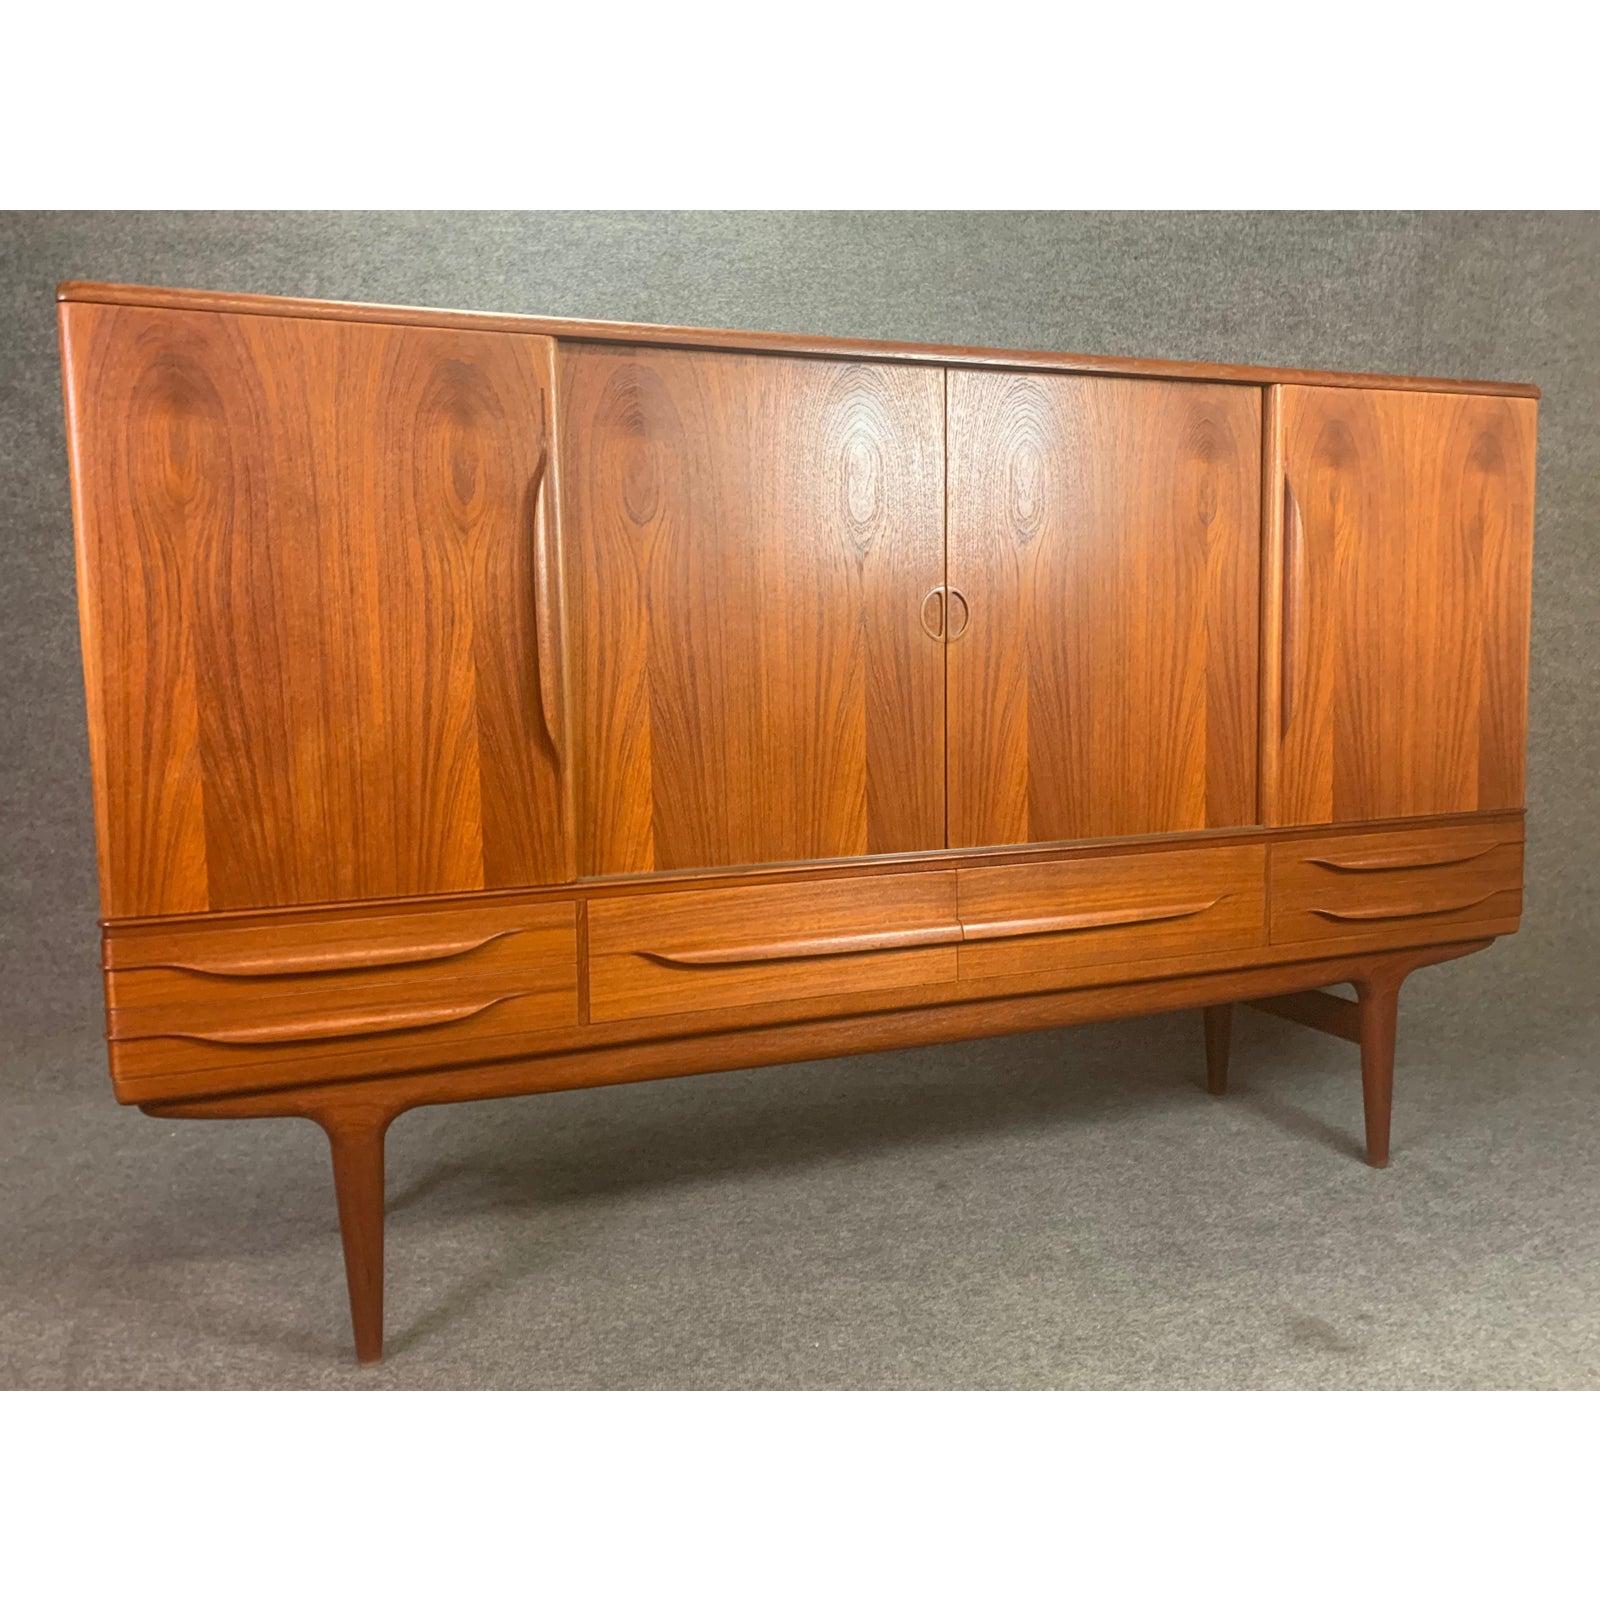 Here is a beautiful sought after Scandinavian Modern highboard in teak wood model UM14 designed by Johannes Andersen and manufactured by Uldum Mobelfabril in Denmark in the 1960s.
This exceptional piece, recently imported from Copenhagen to